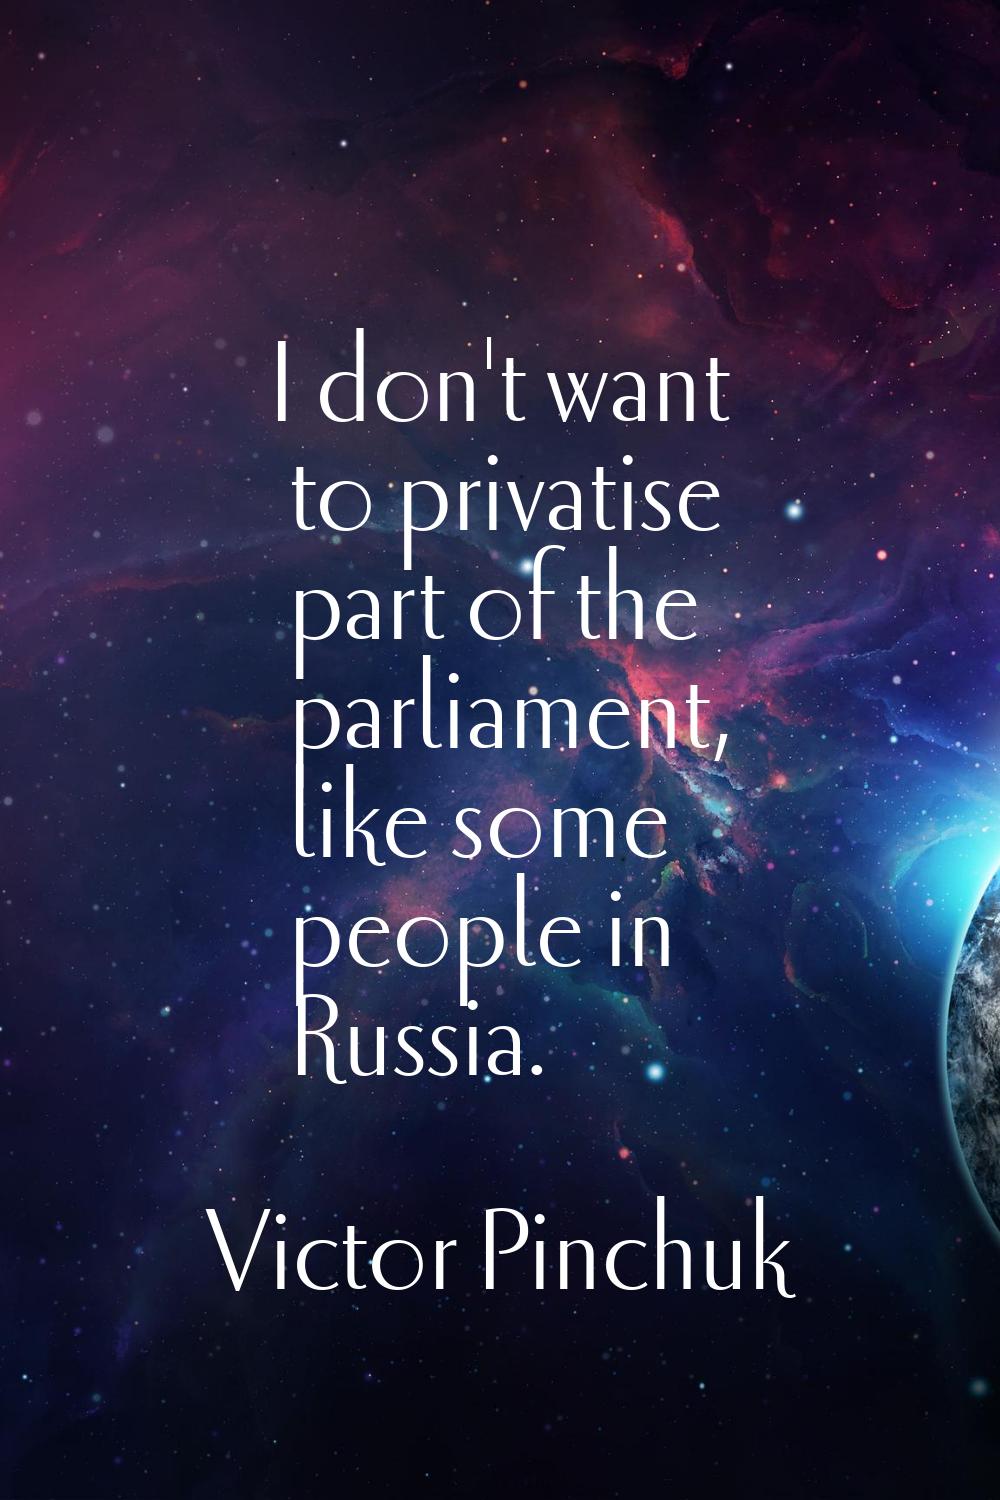 I don't want to privatise part of the parliament, like some people in Russia.